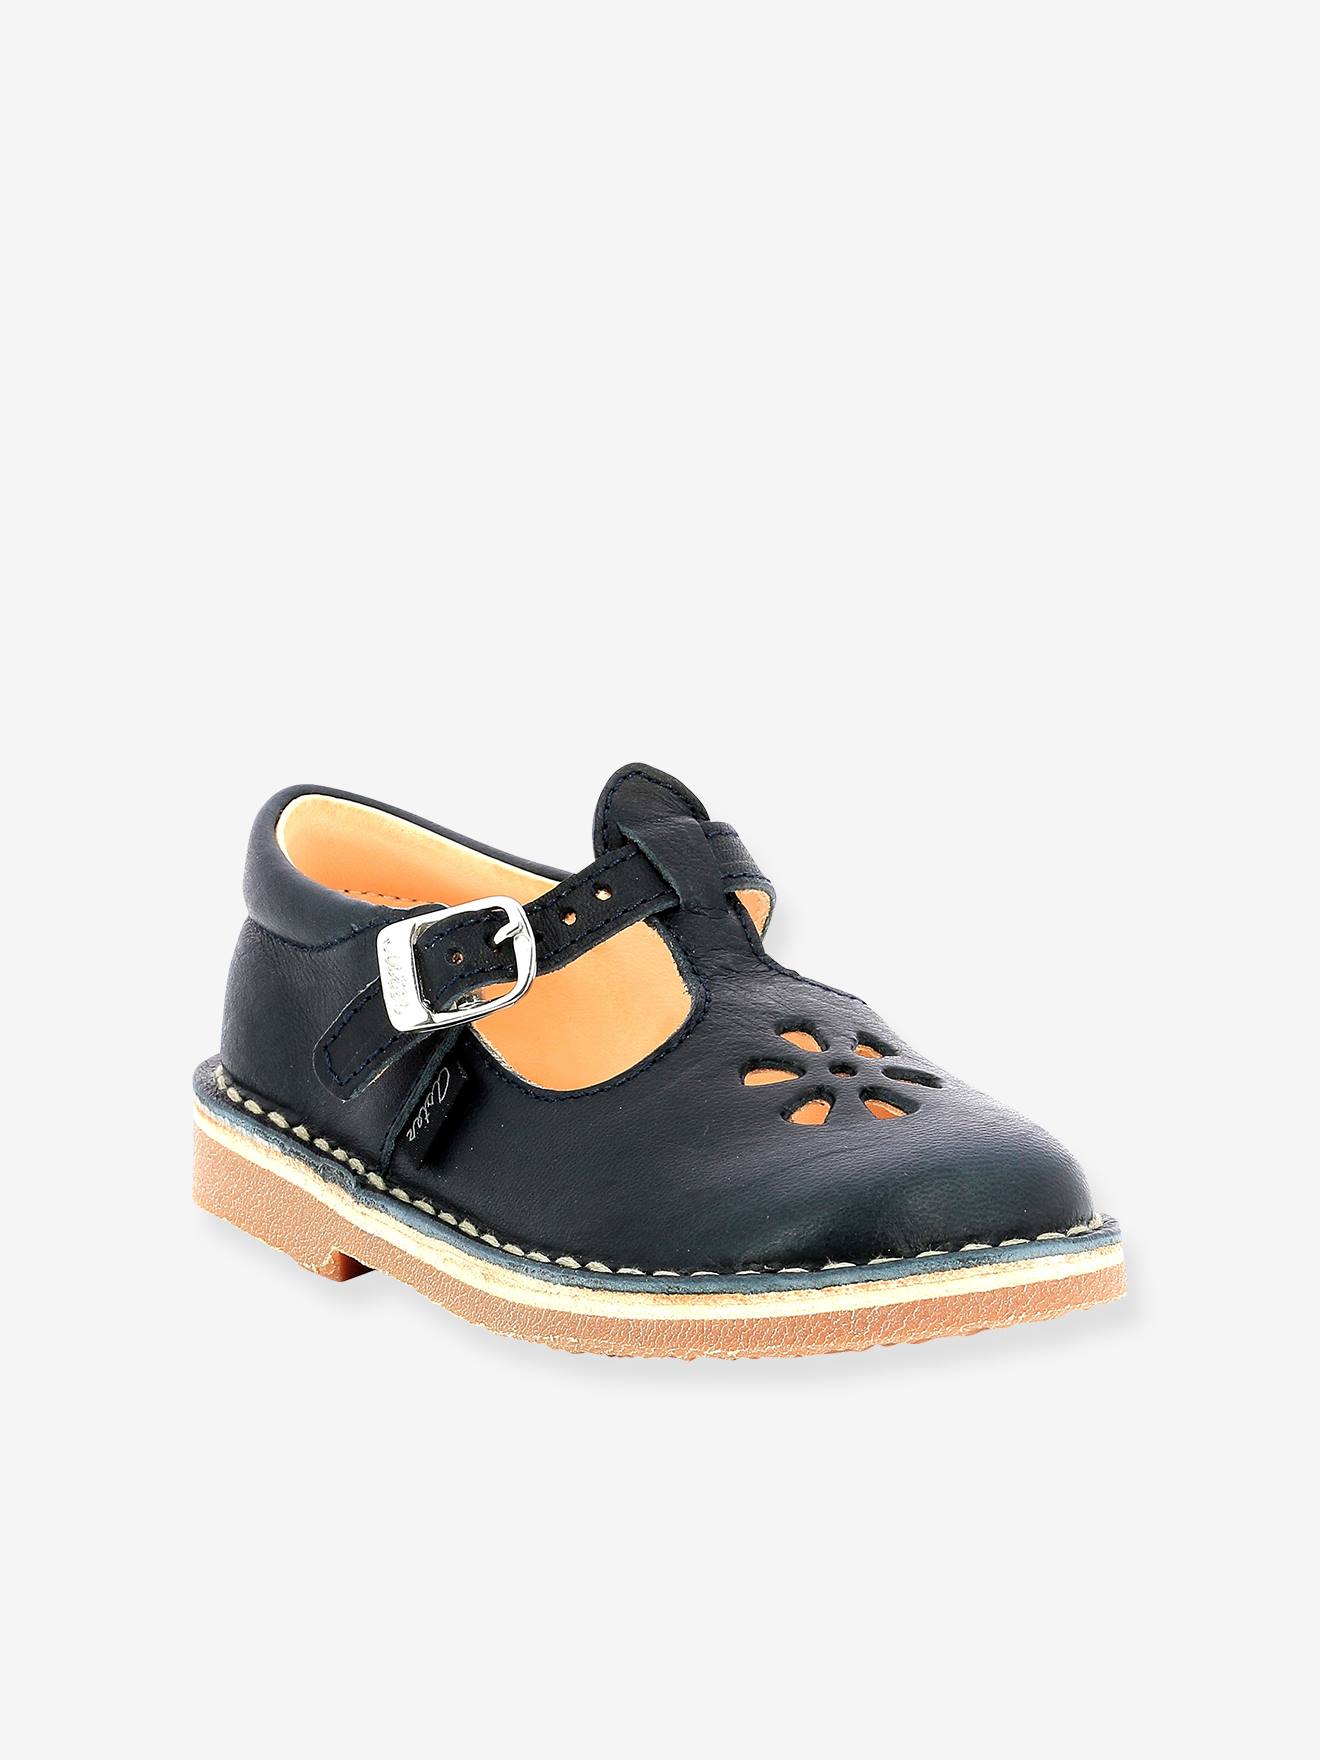 T-Bar Shoes in Vegetable Tanned Leather, Dingo 2 ASTER(r) blue dark solid